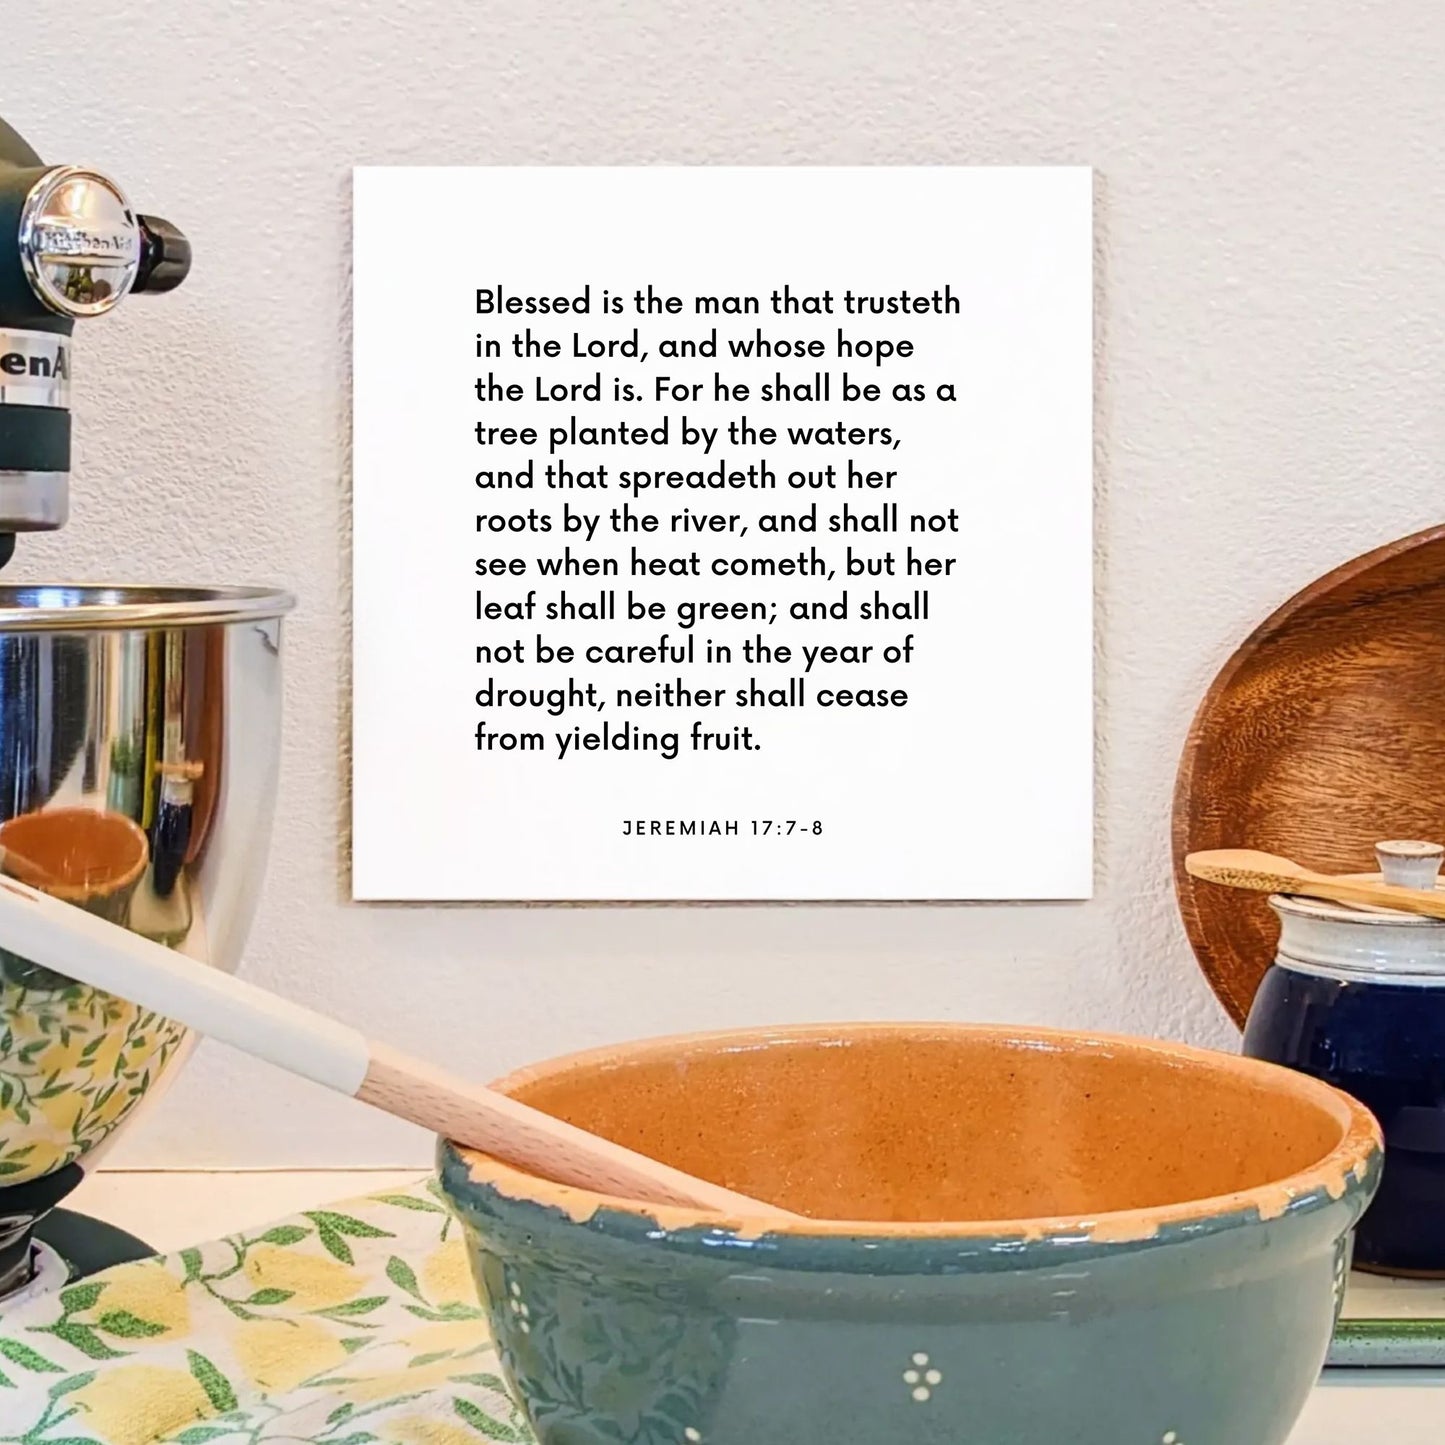 Kitchen mouting of the scripture tile for Jeremiah 17:7-8 - "Blessed is the man that trusteth in the Lord"